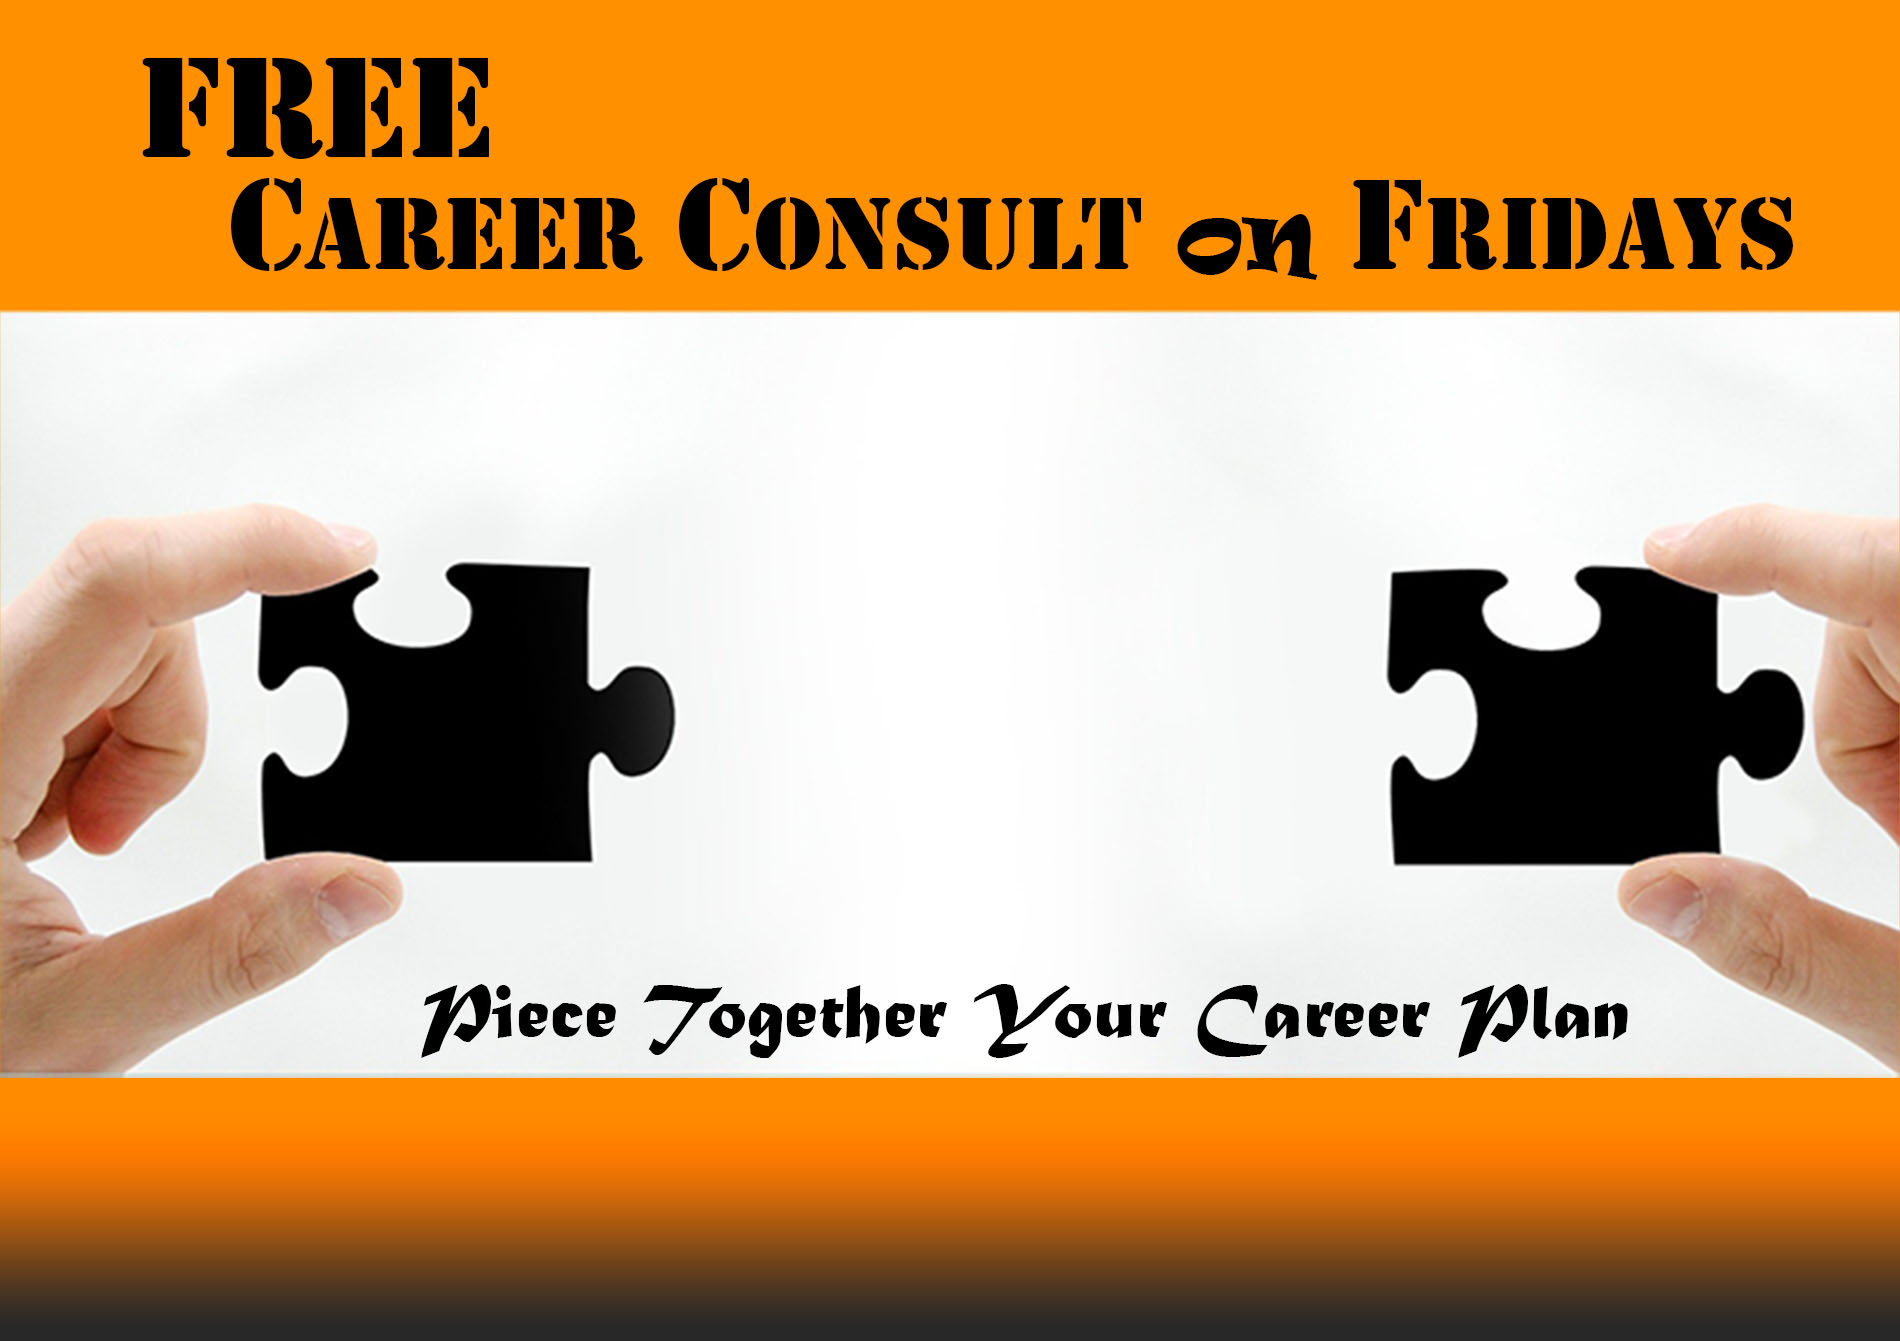 Free Career Consult with Career Coach